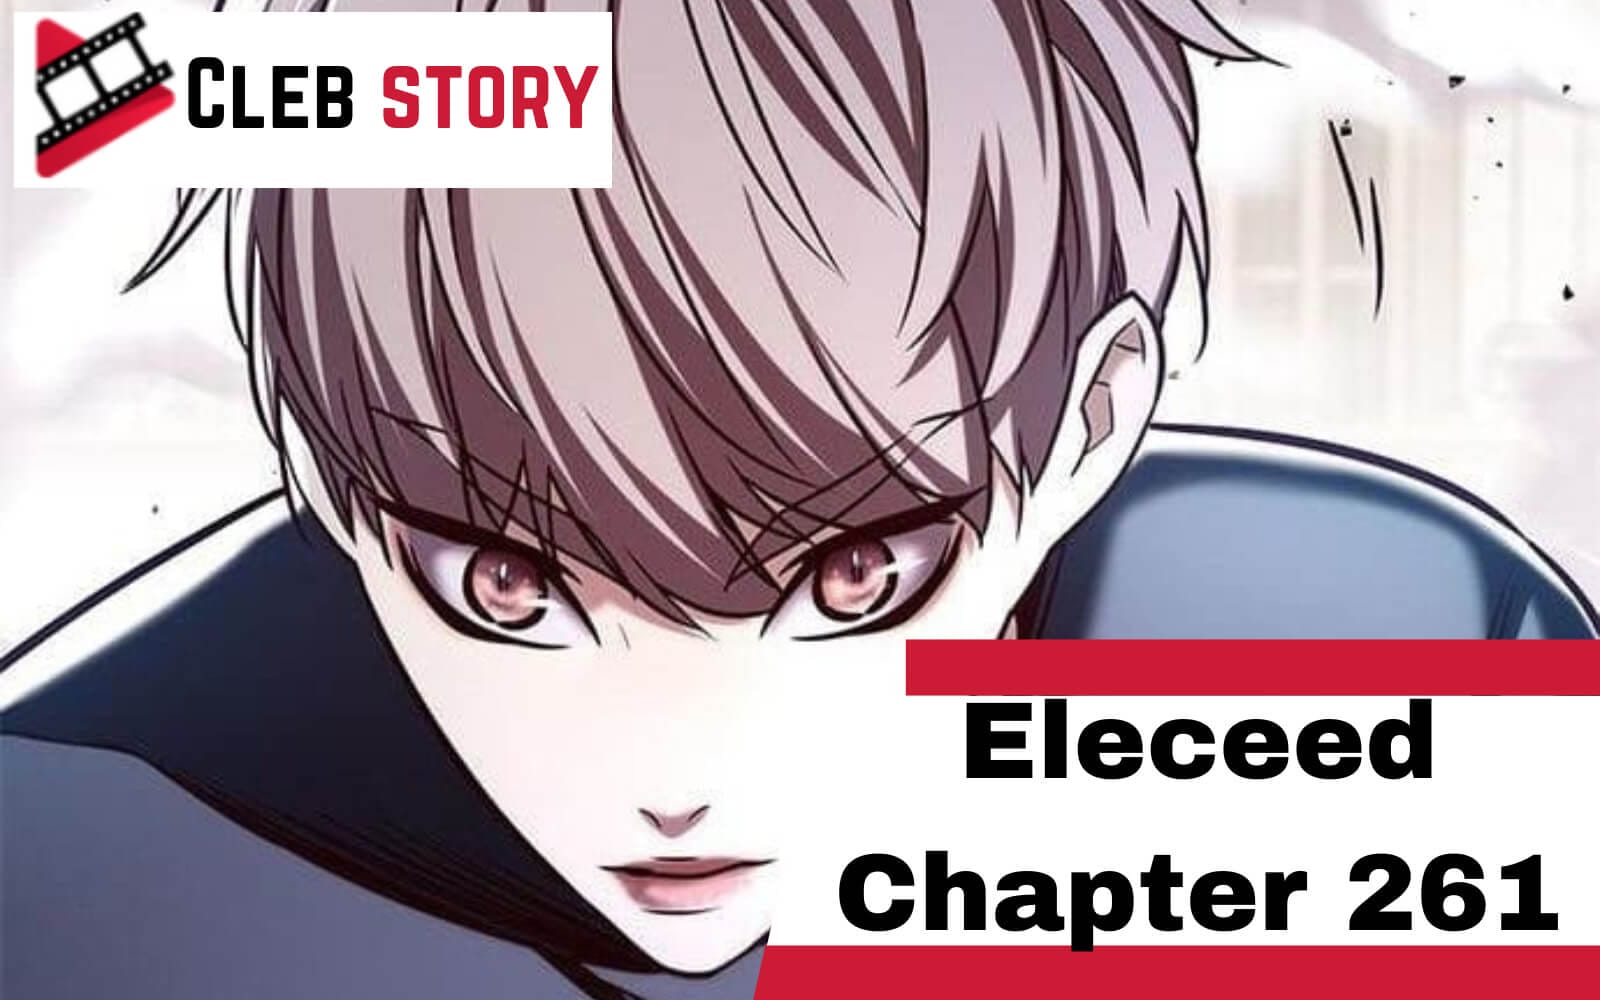 What will be going to happen in Eleceed Chapter 261